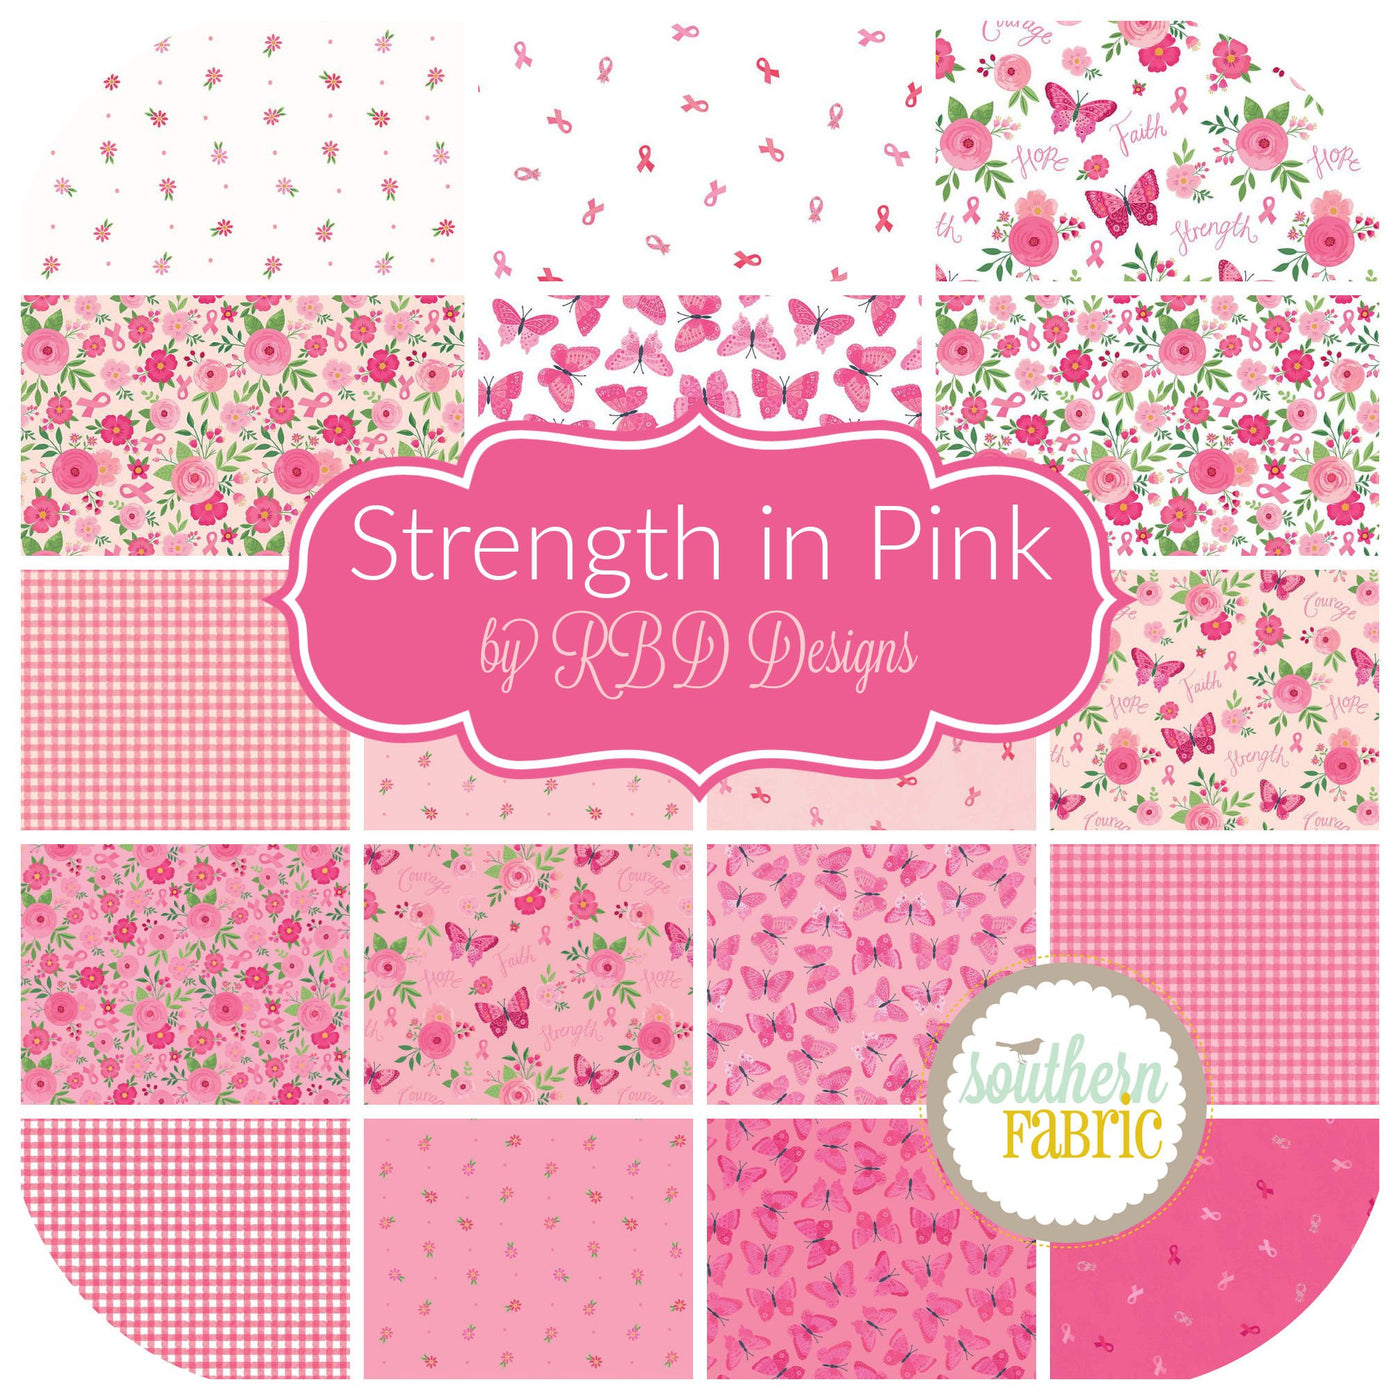 Strength in Pink Layer Cake (42 pcs) by RBD Designs for Riley Blake (10-12620-42)